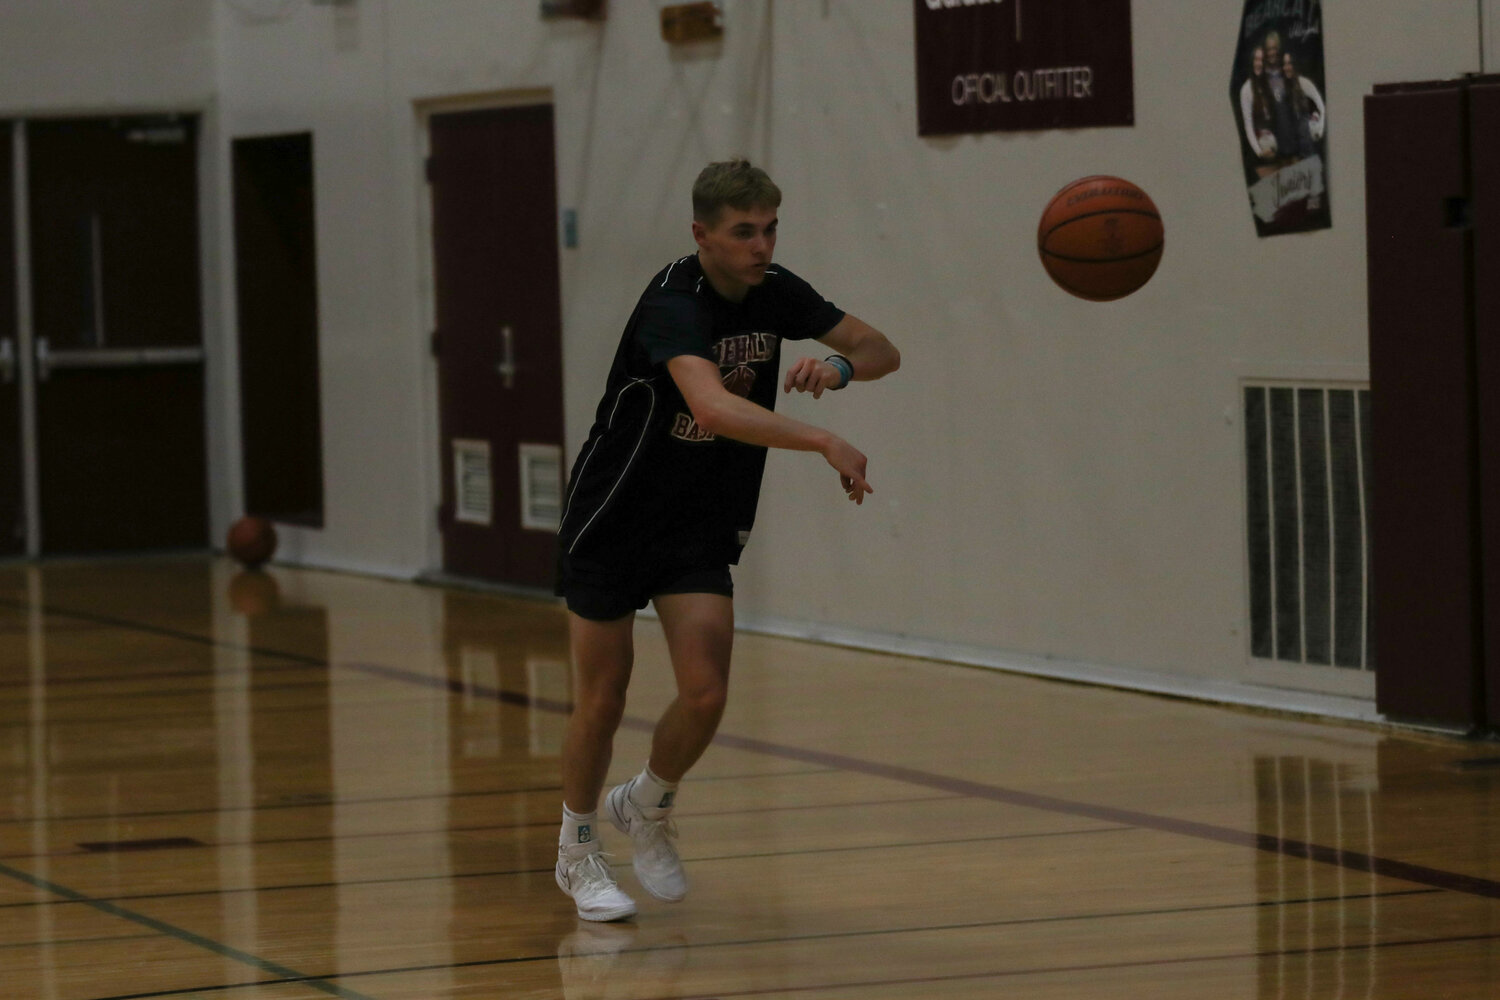 Brooks Ledgerwood dishes the ball to a teammate in a drill during W.F. West's practice on Nov. 21.